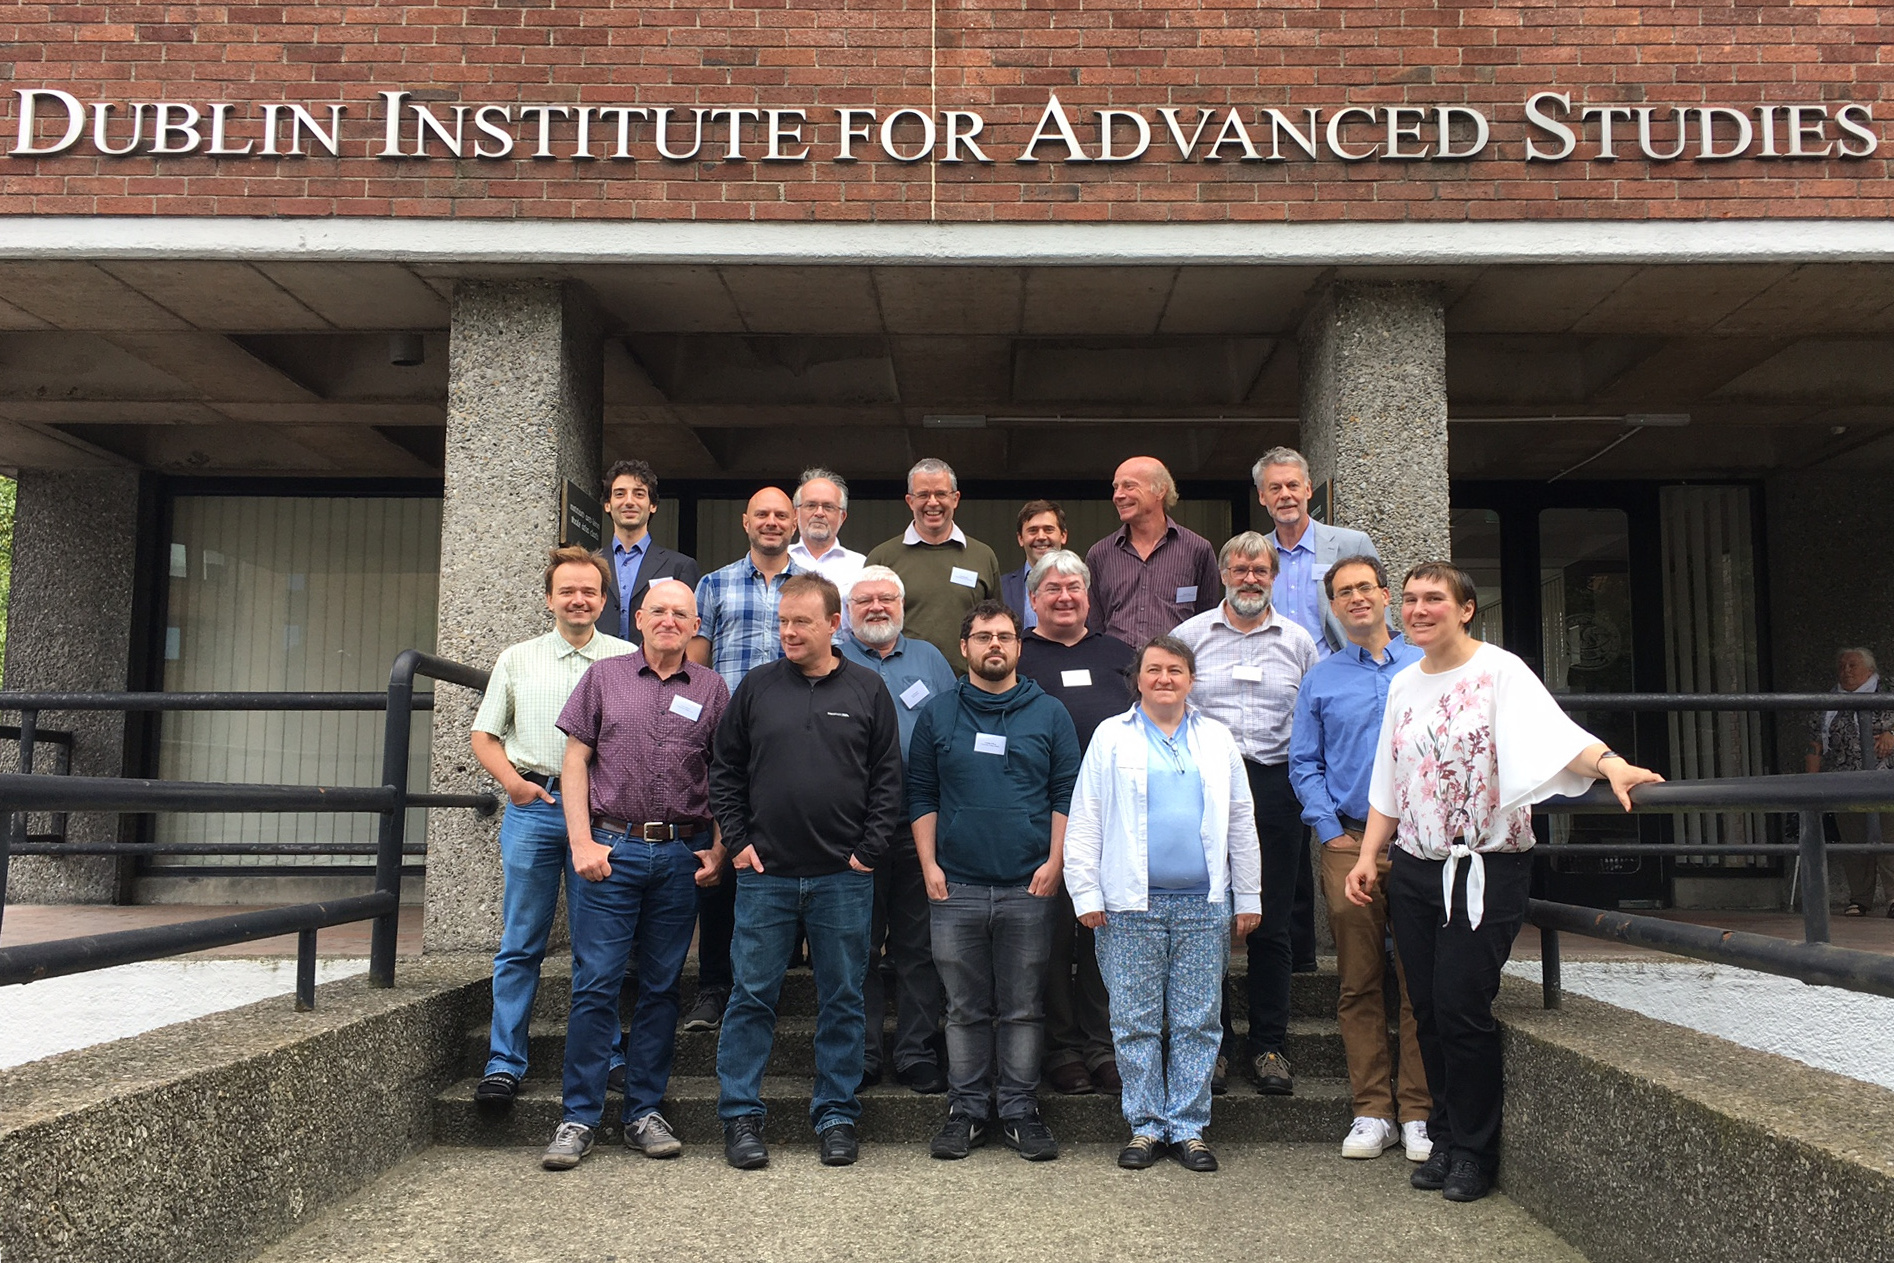 Group Photo from Dublin Meeting